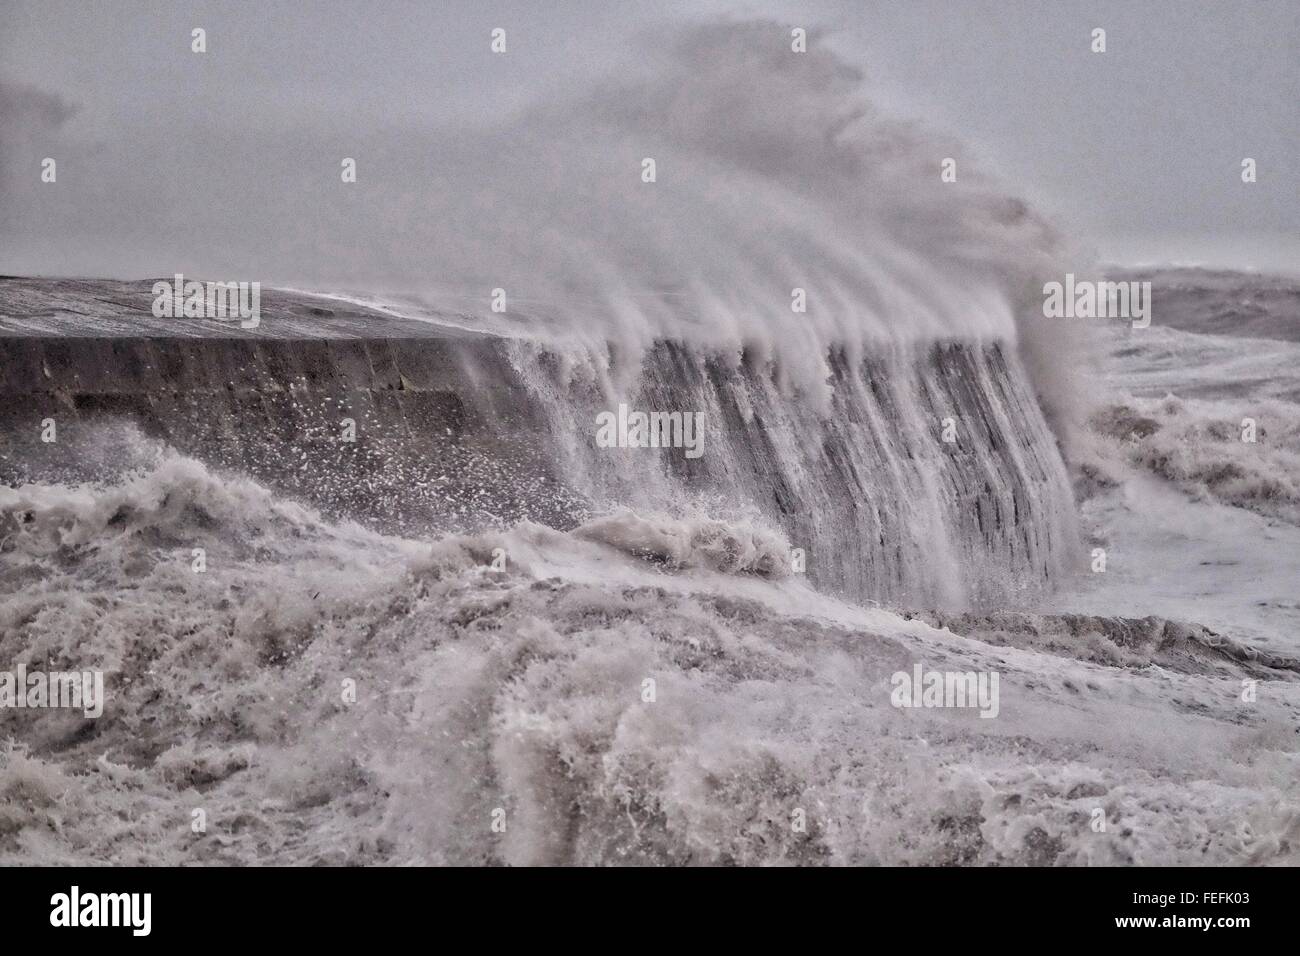 Lyme Regis, Dorset, UK. 6 February 2016. Waves crash over Lyme Regis historic Cobb at high tide as the Environment issue 35 Flood warnings and 48 Flood Alerts for the South West. Credit:  Tom Corban/Alamy Live News Stock Photo